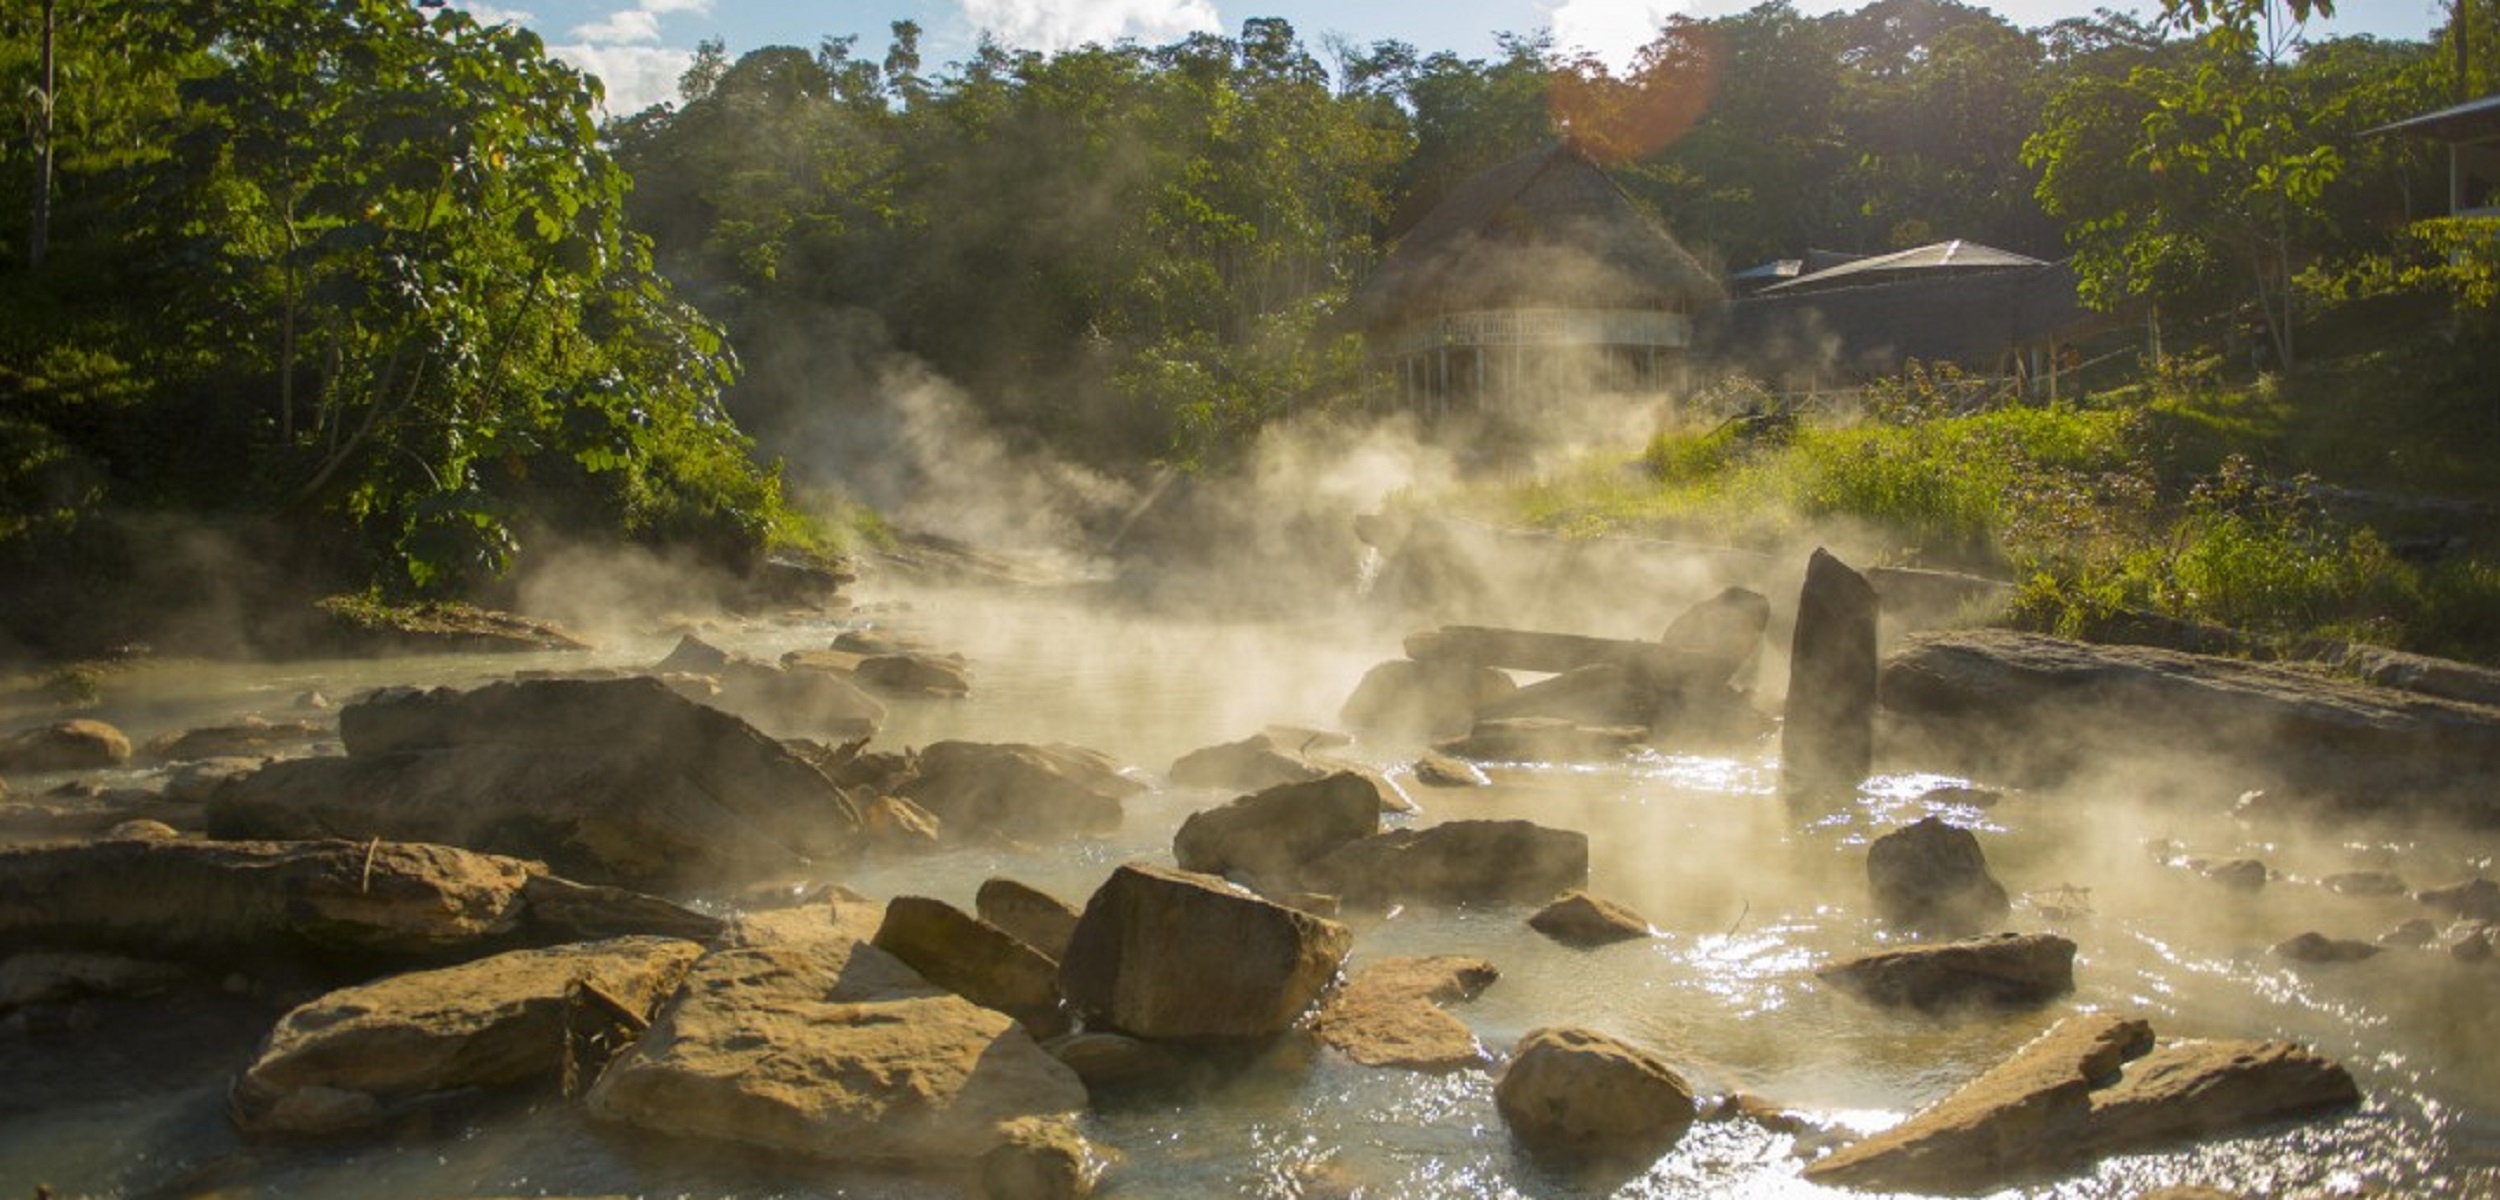 BOILING RIVER AMAZON JUNGLE Must See Global